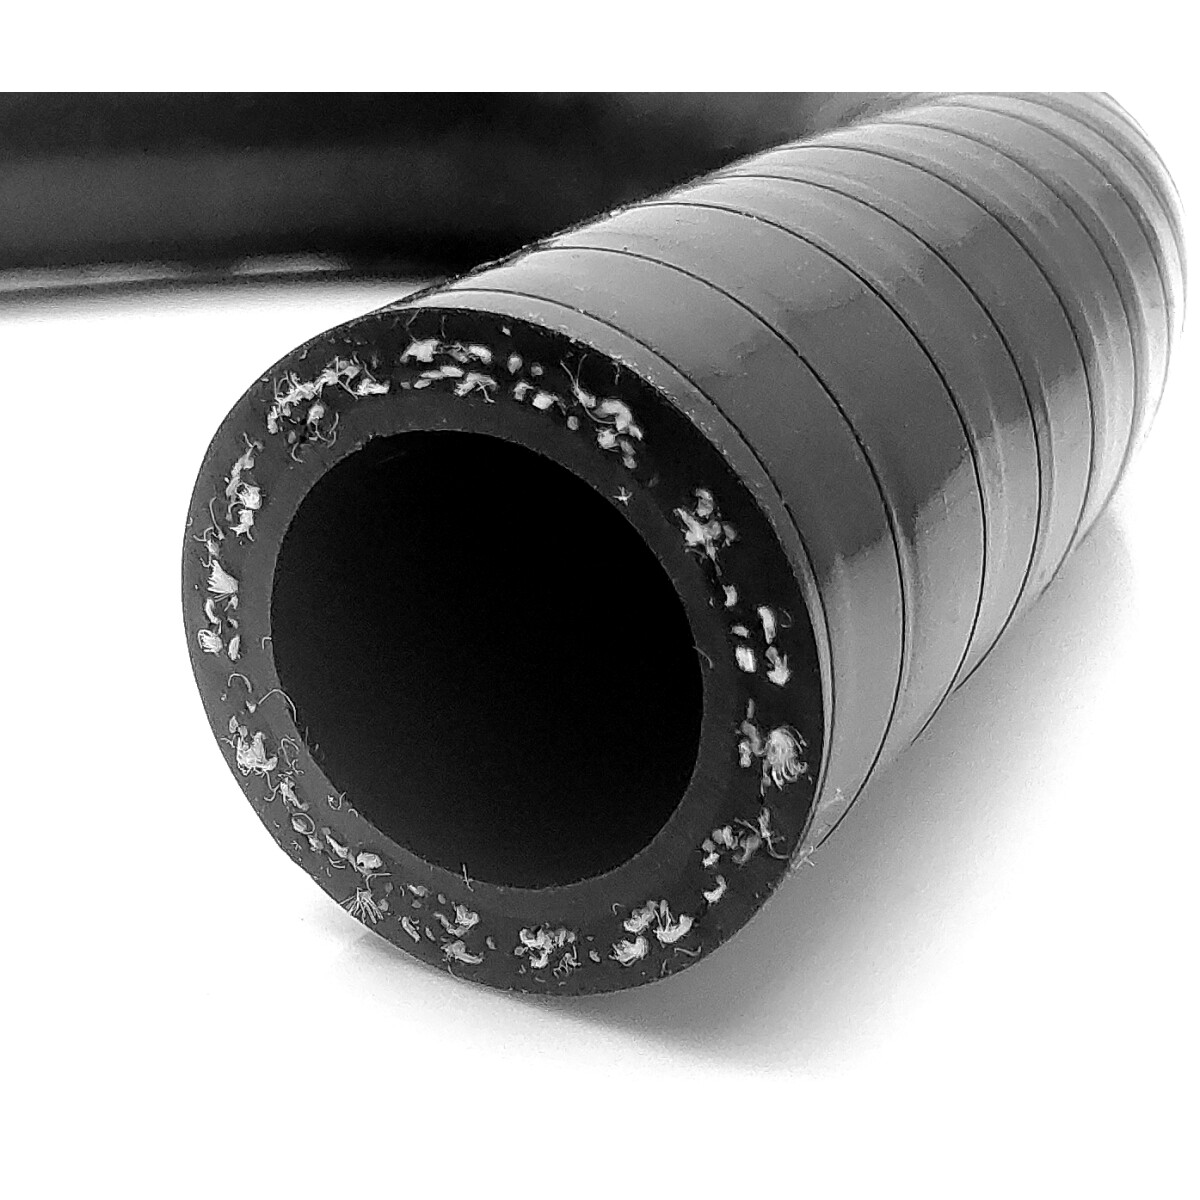 Connecting fuel hose for Polo G40 (OEM only to compare 867201543a)